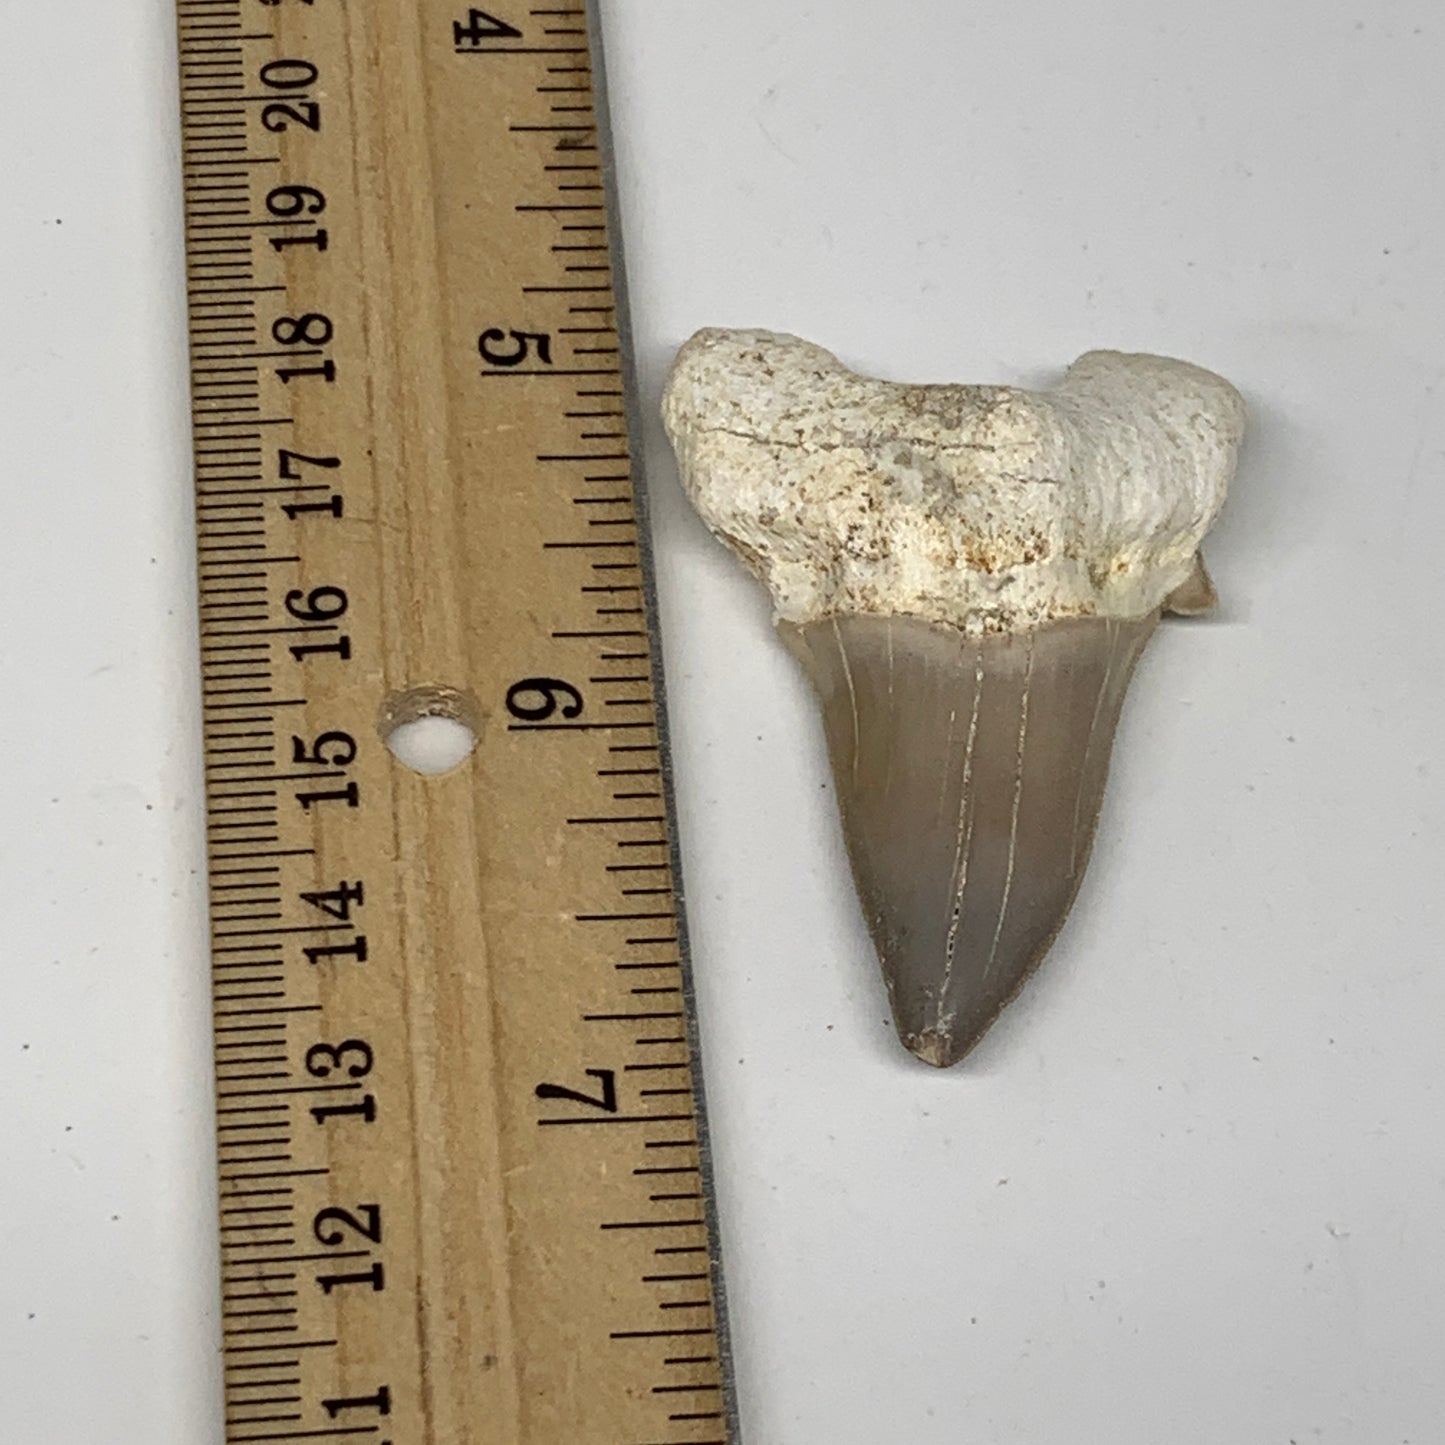 14.5g, 1.9"X 1.4"x 0.6" Natural Fossils Fish Shark Tooth @Morocco, B12661